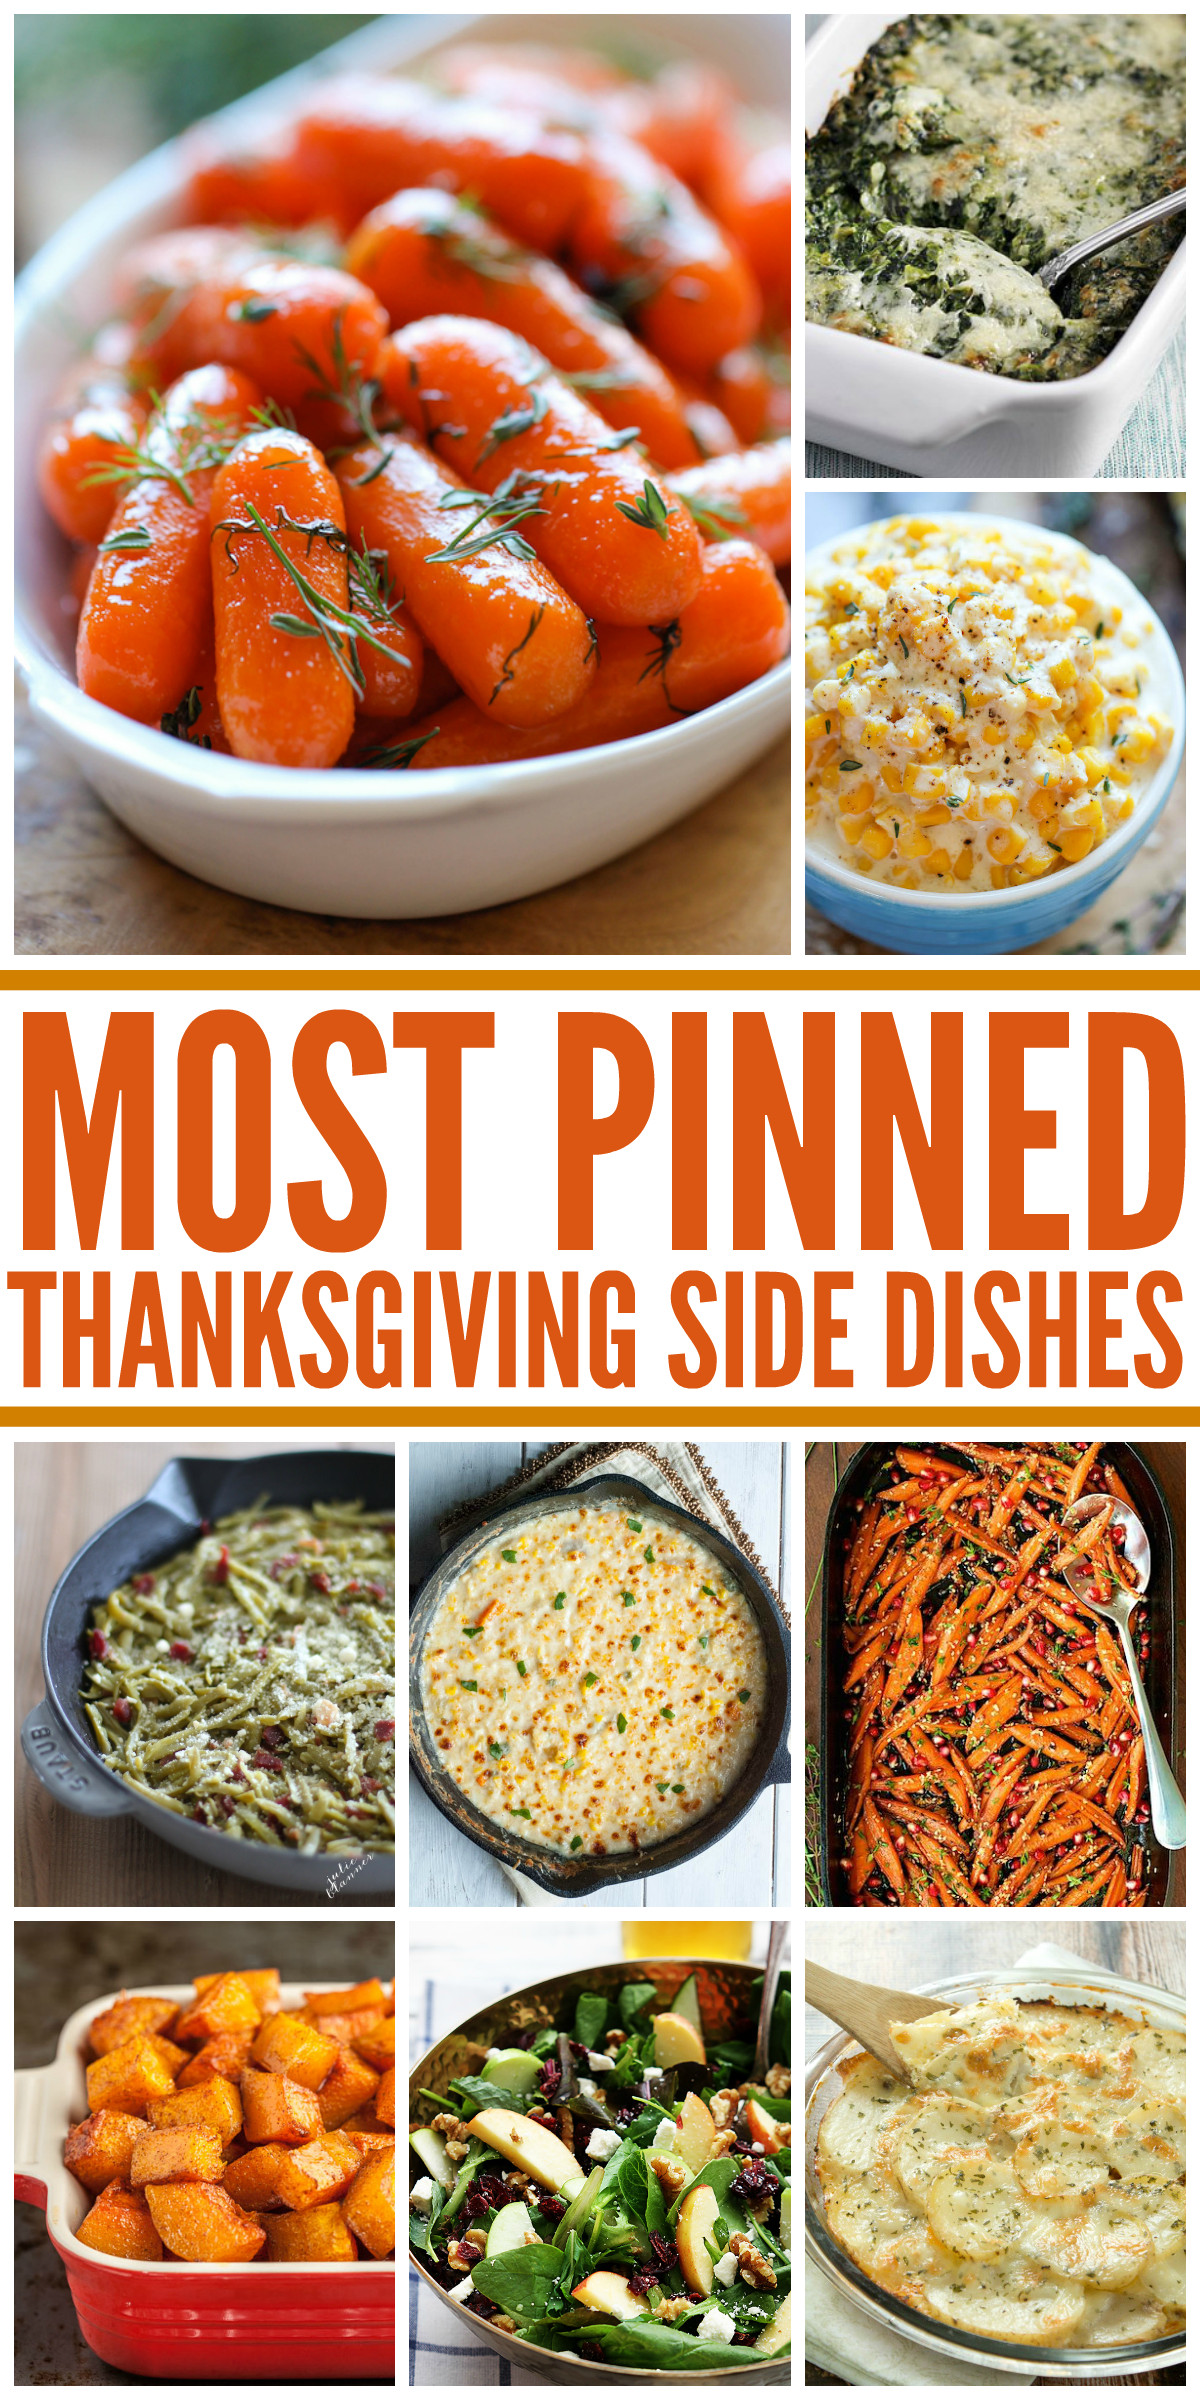 Thanksgiving Vegetable Dish Ideas
 Check out the 25 MOST PINNED side dish recipes perfect